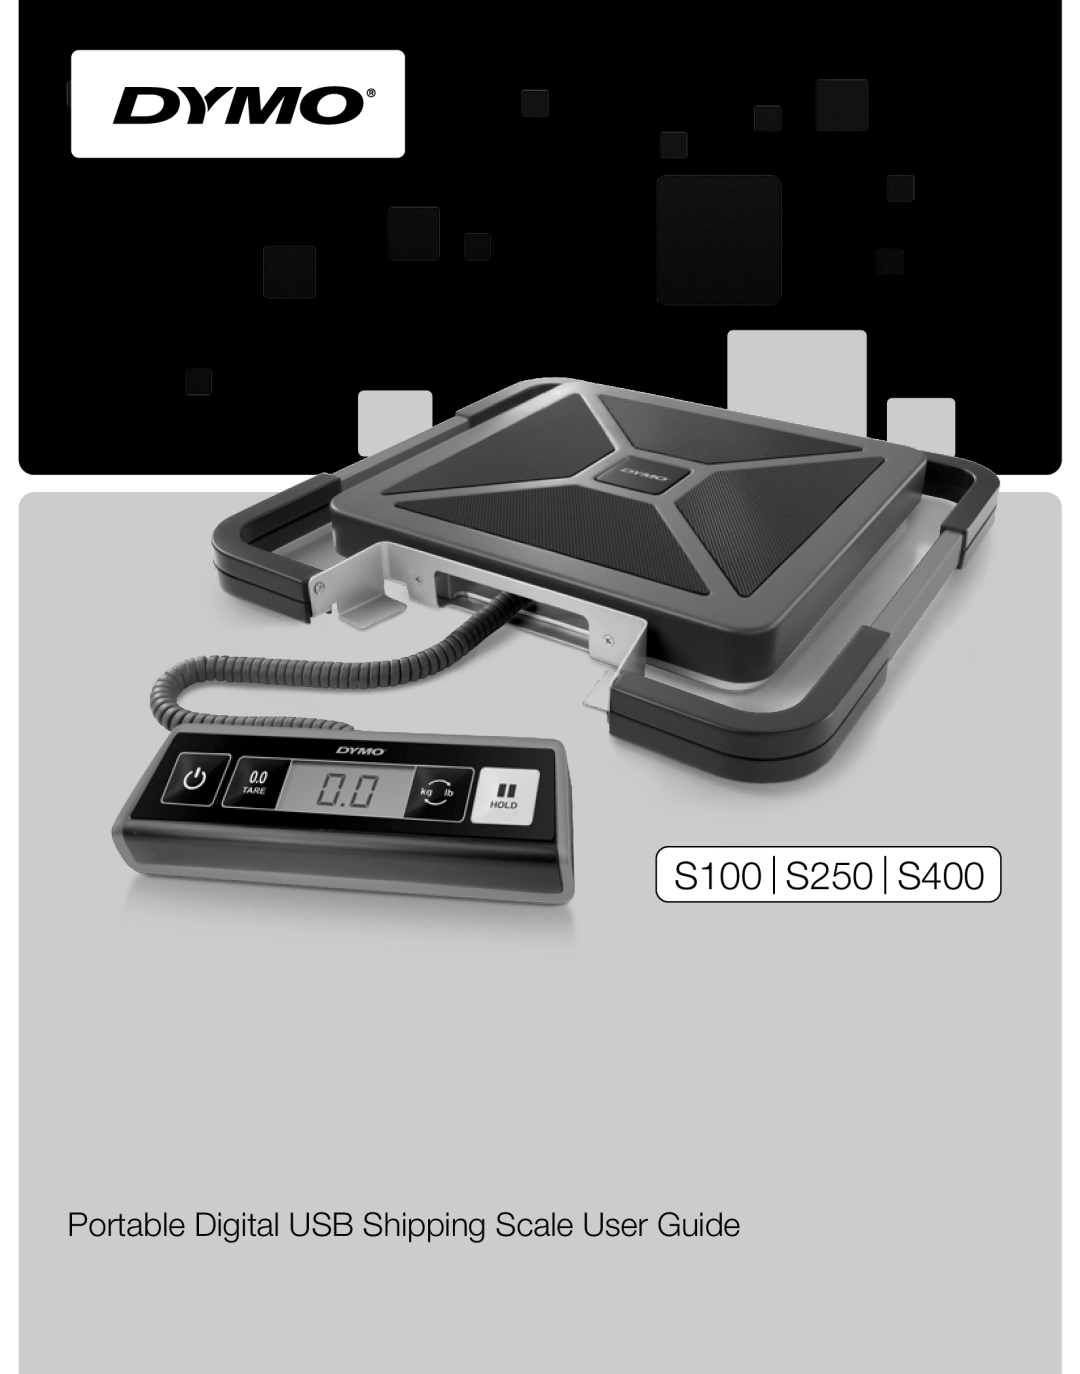 Dymo manual Portable Digital USB Shipping Scale User Guide, S100 S250 S400 